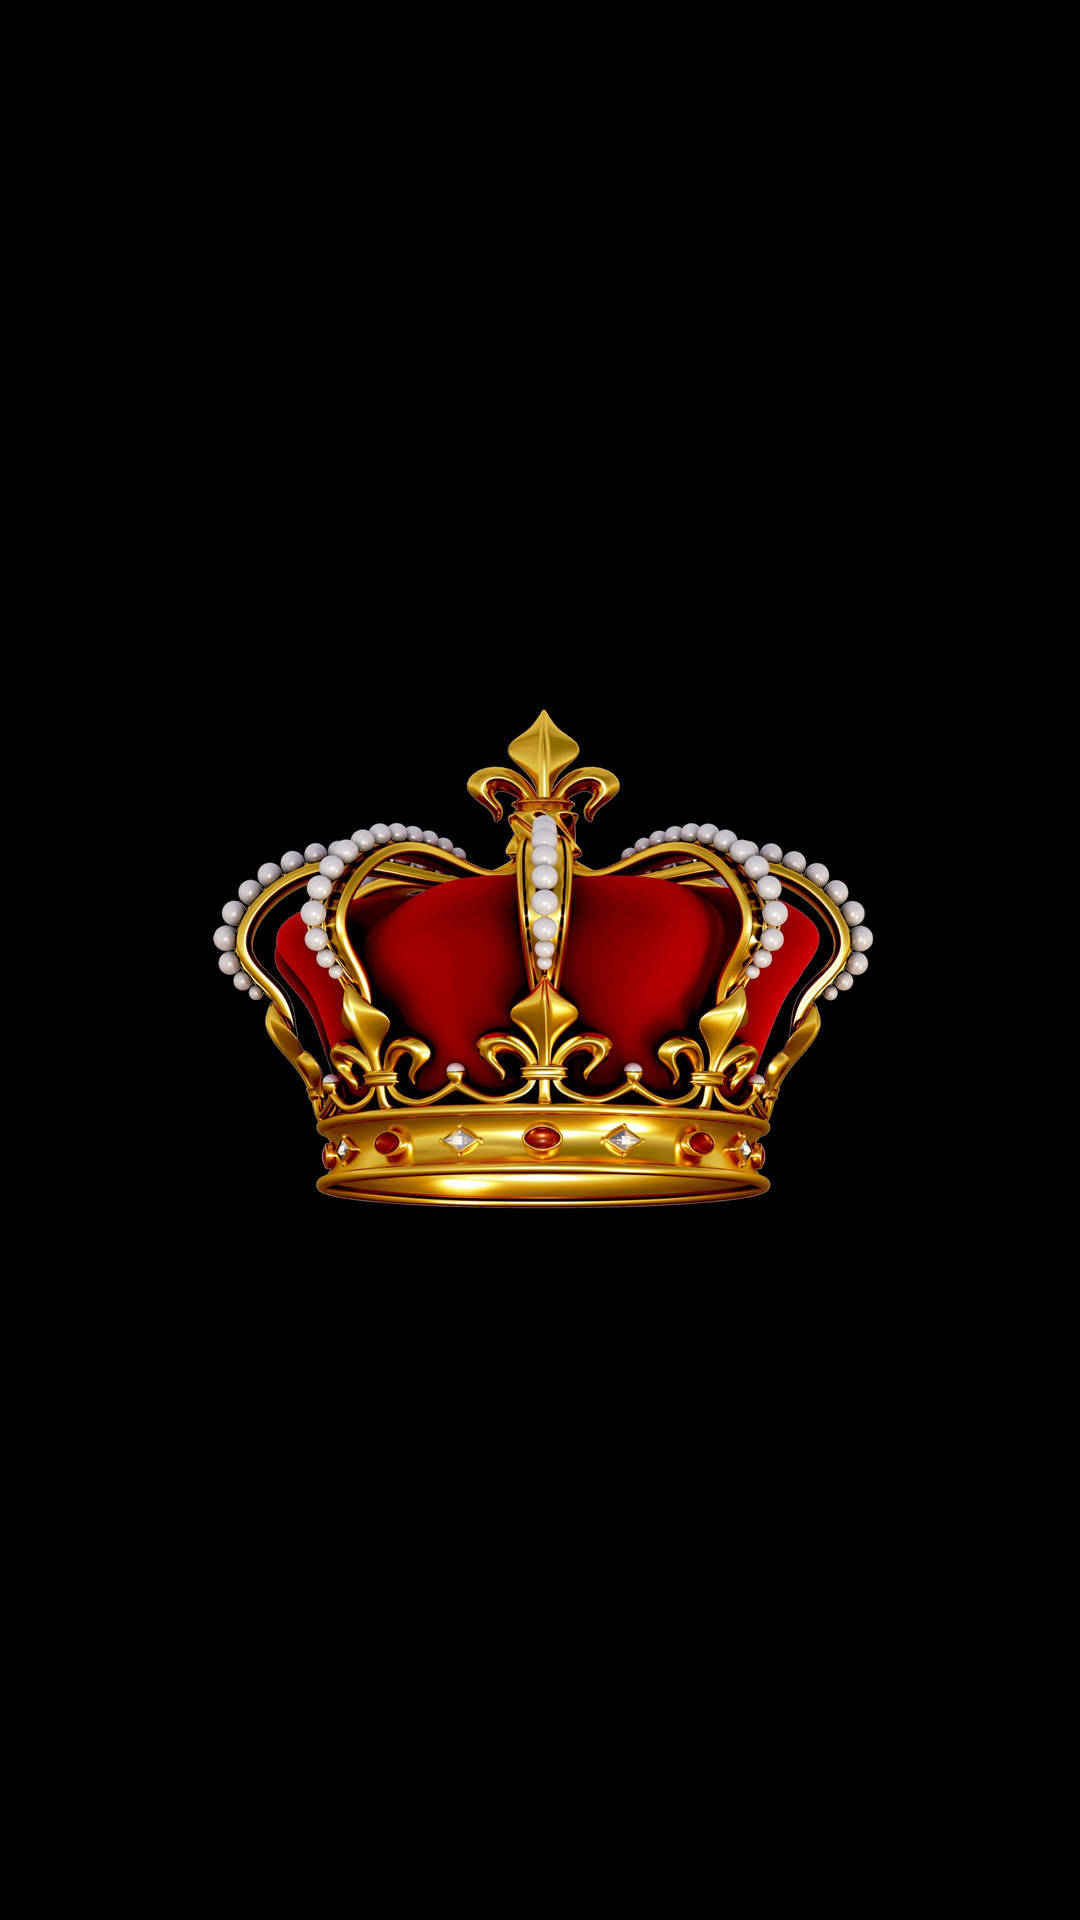 Amoled Android Royal Crown Background